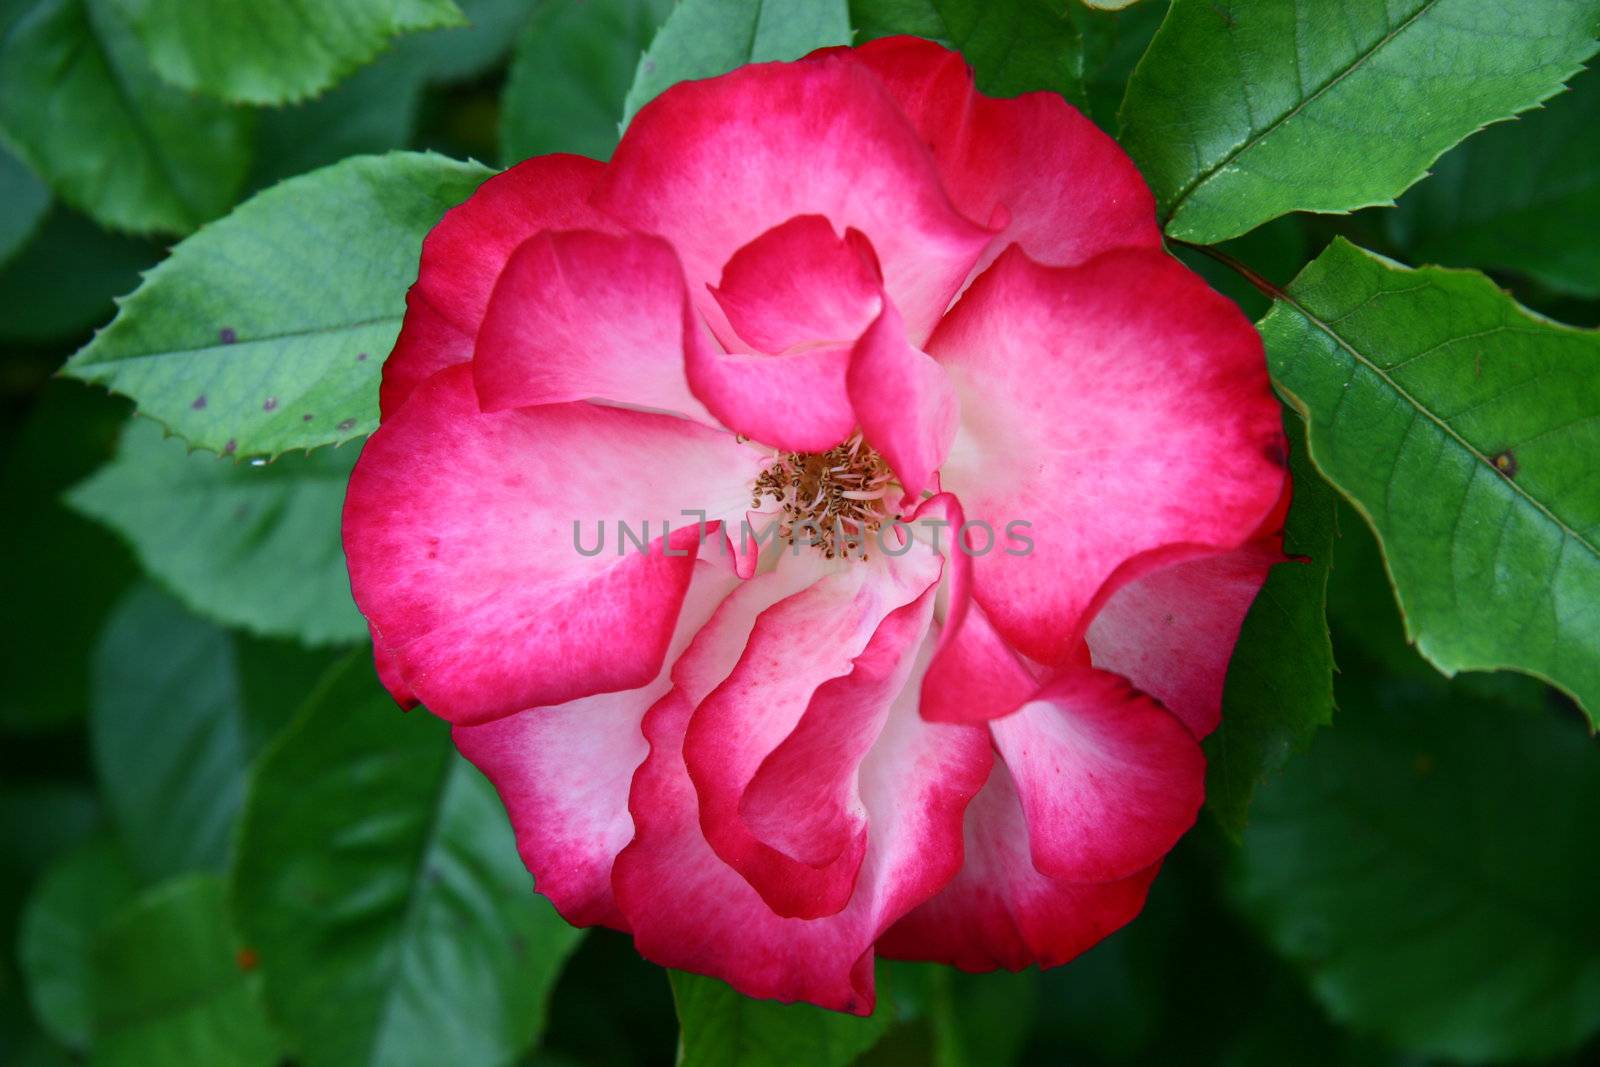 single red rose against a background of leaves